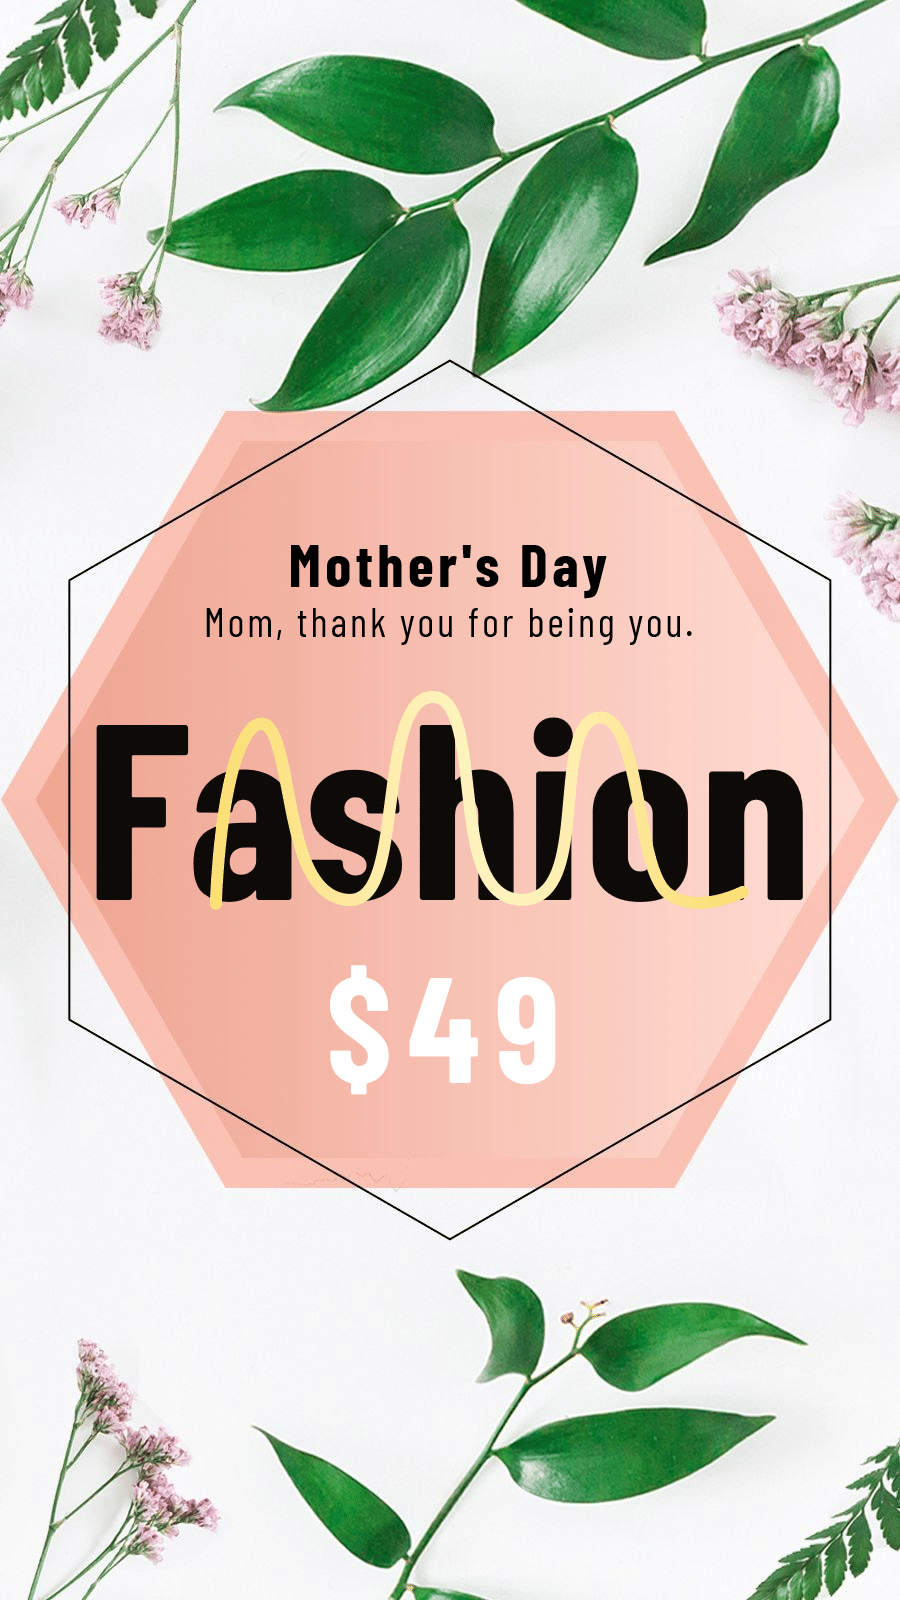 Green Leaf Simple Fresh Mother's Day Clothes Promo Instagram Story